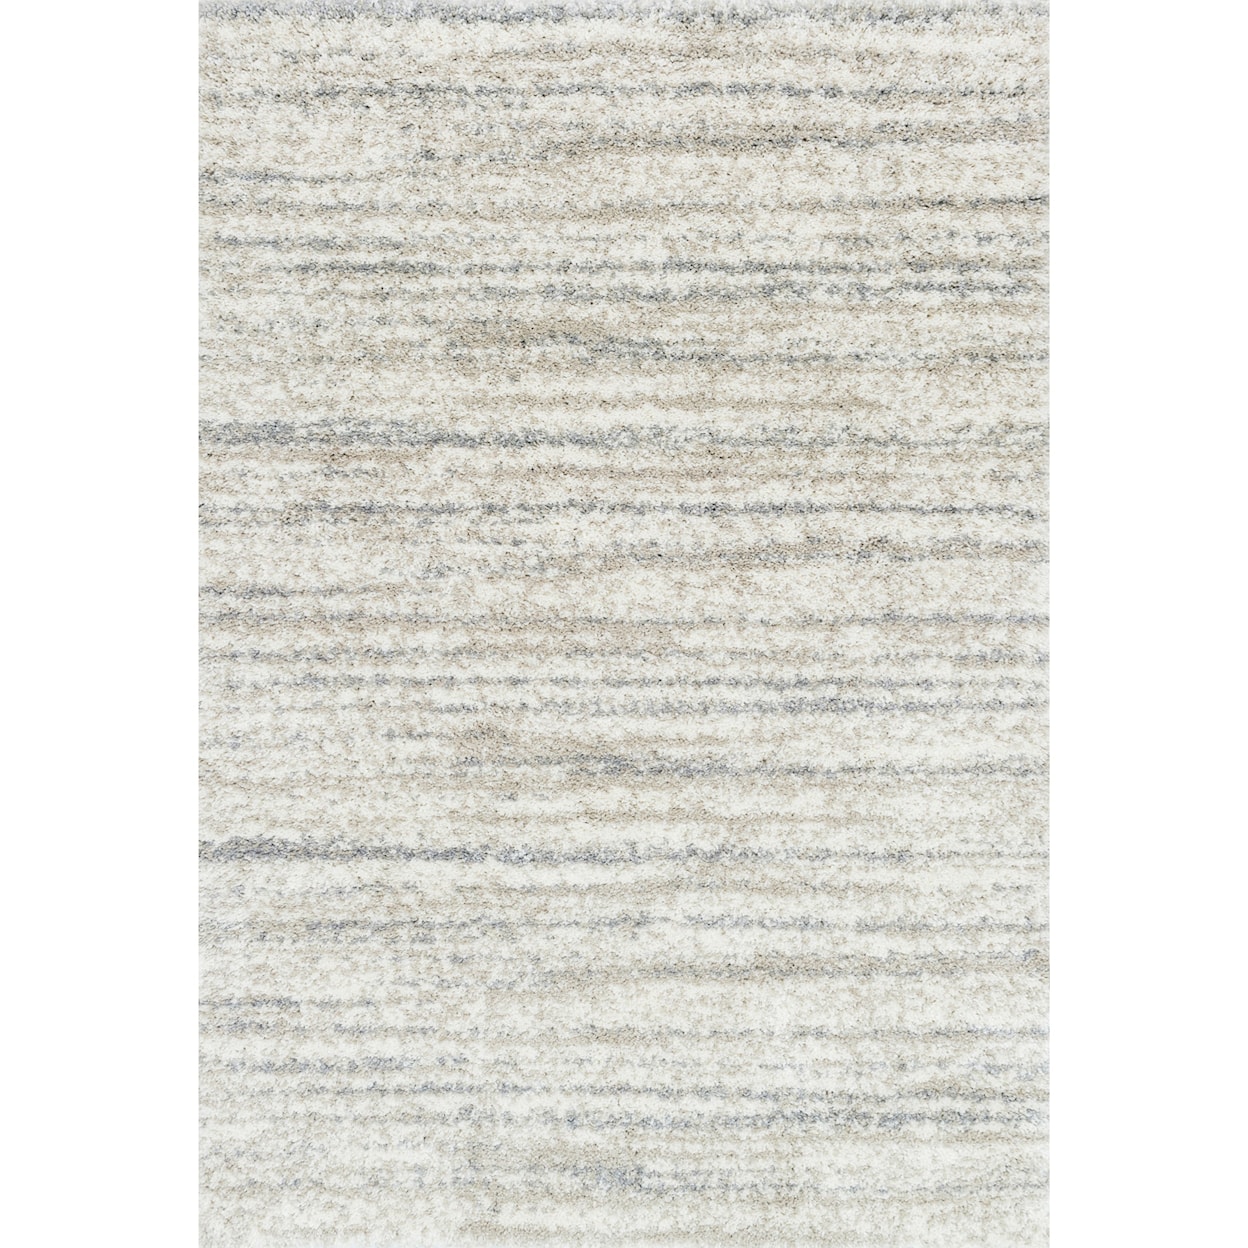 Reeds Rugs Quincy 2'3" x 4'0" Sand Rug